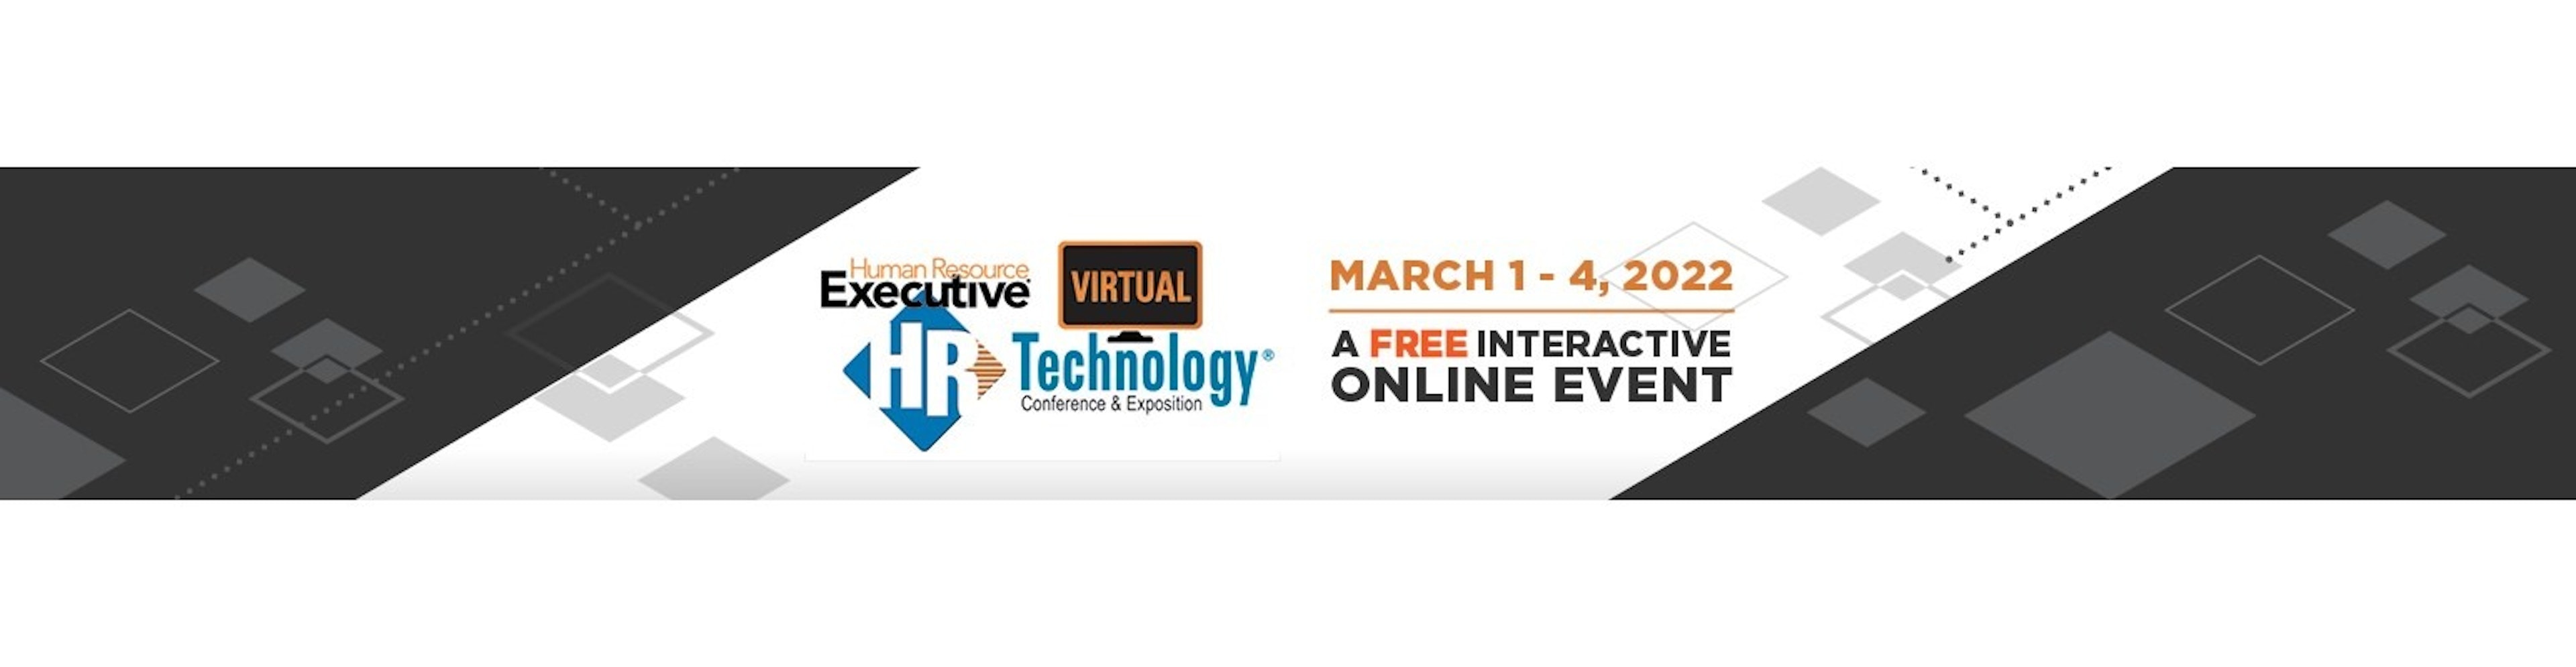 Cover image of VIRTUAL HR TECHNOLOGY CONFERENCE & EXPOSITION